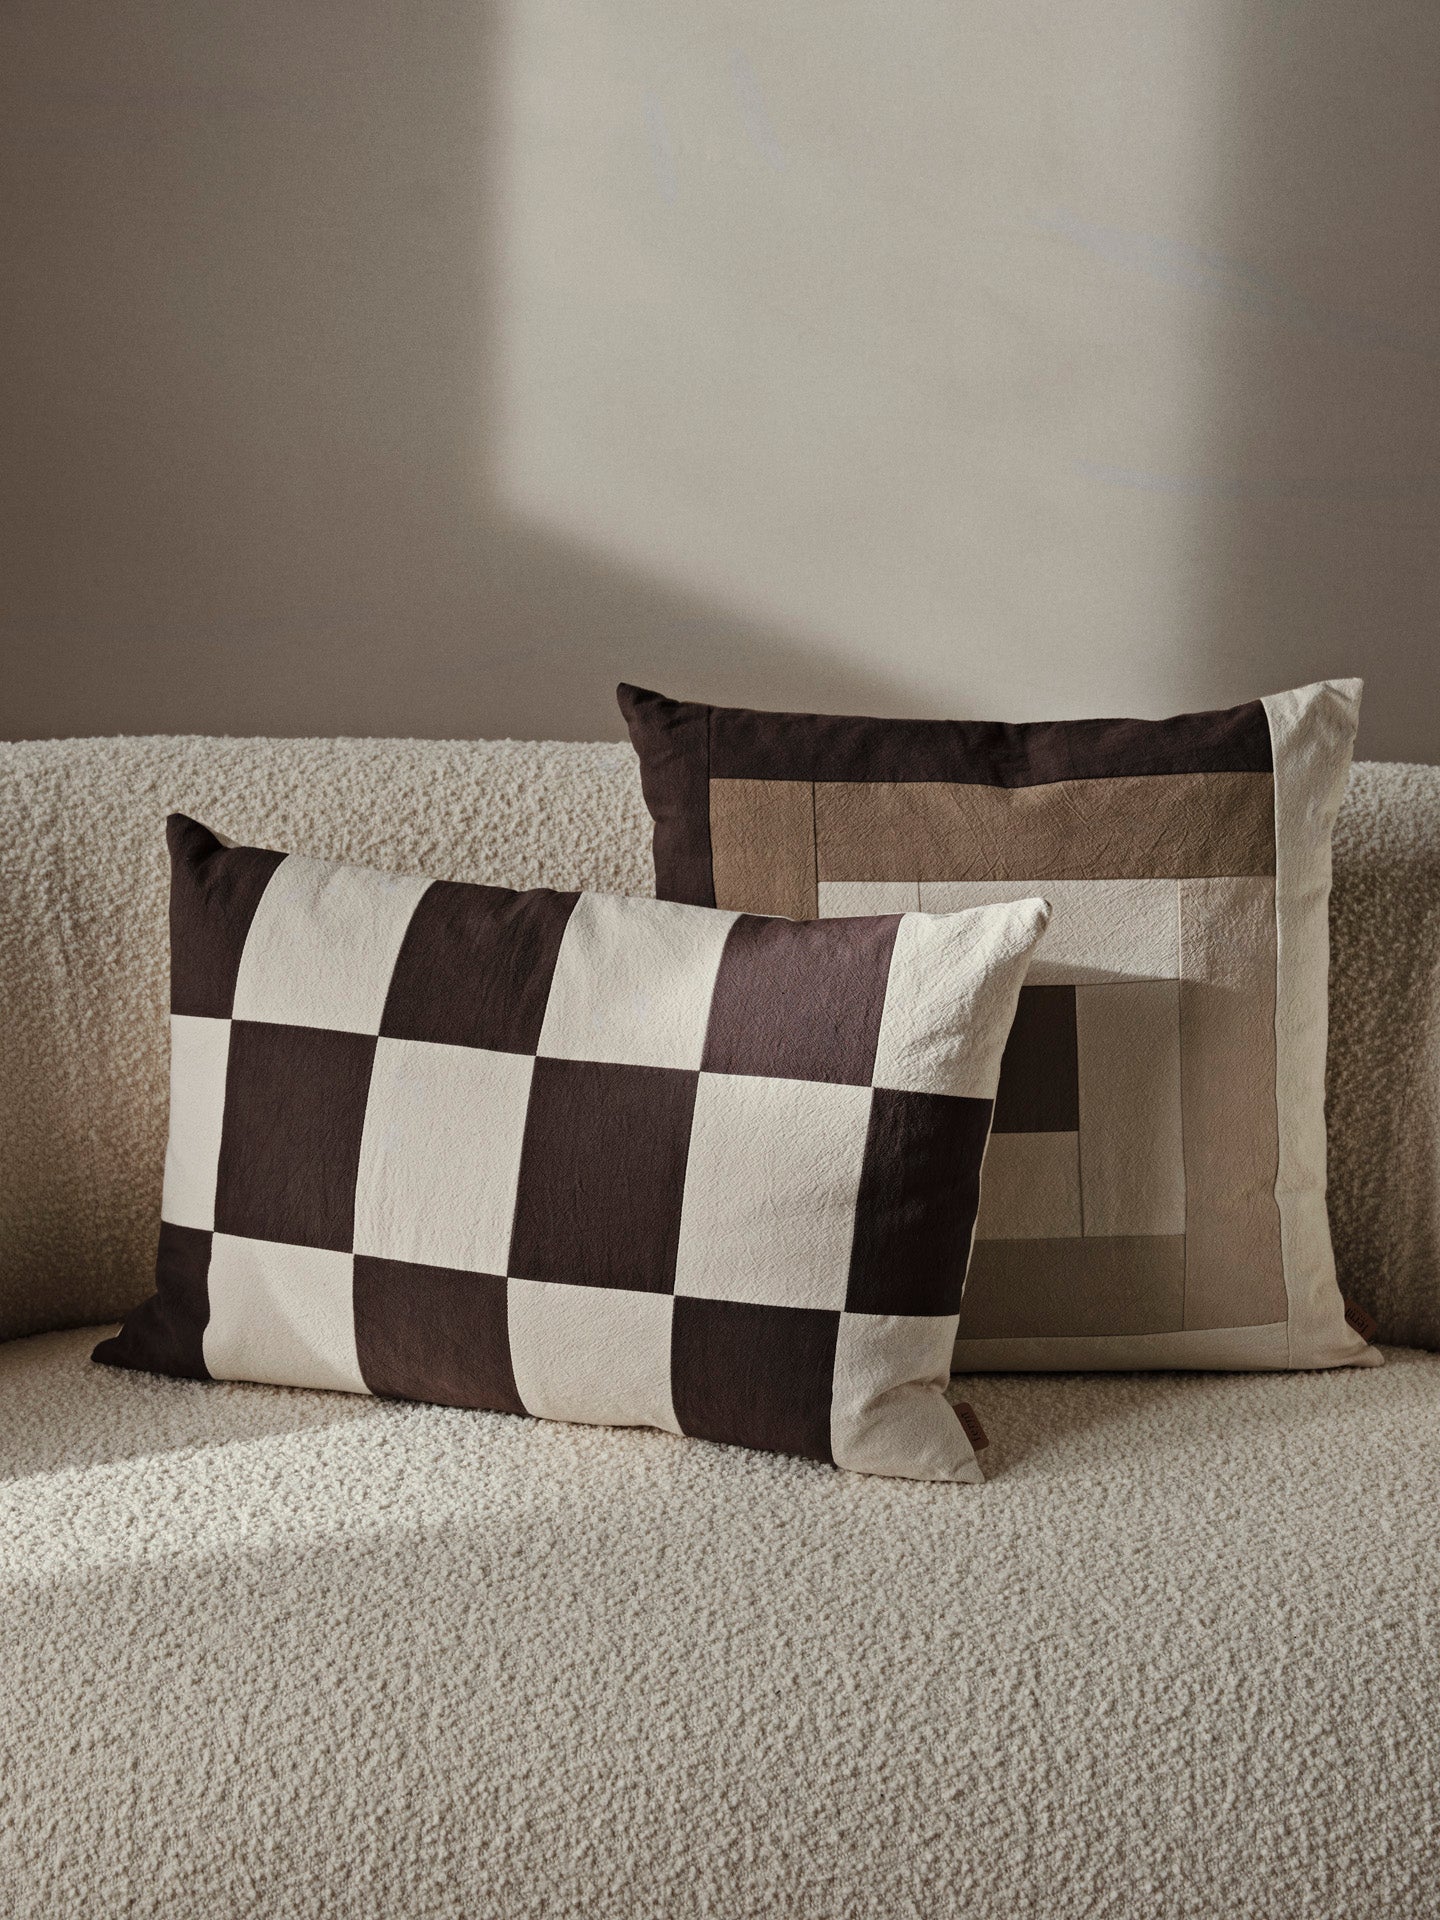 Fold Patchwork Pillow - More Options